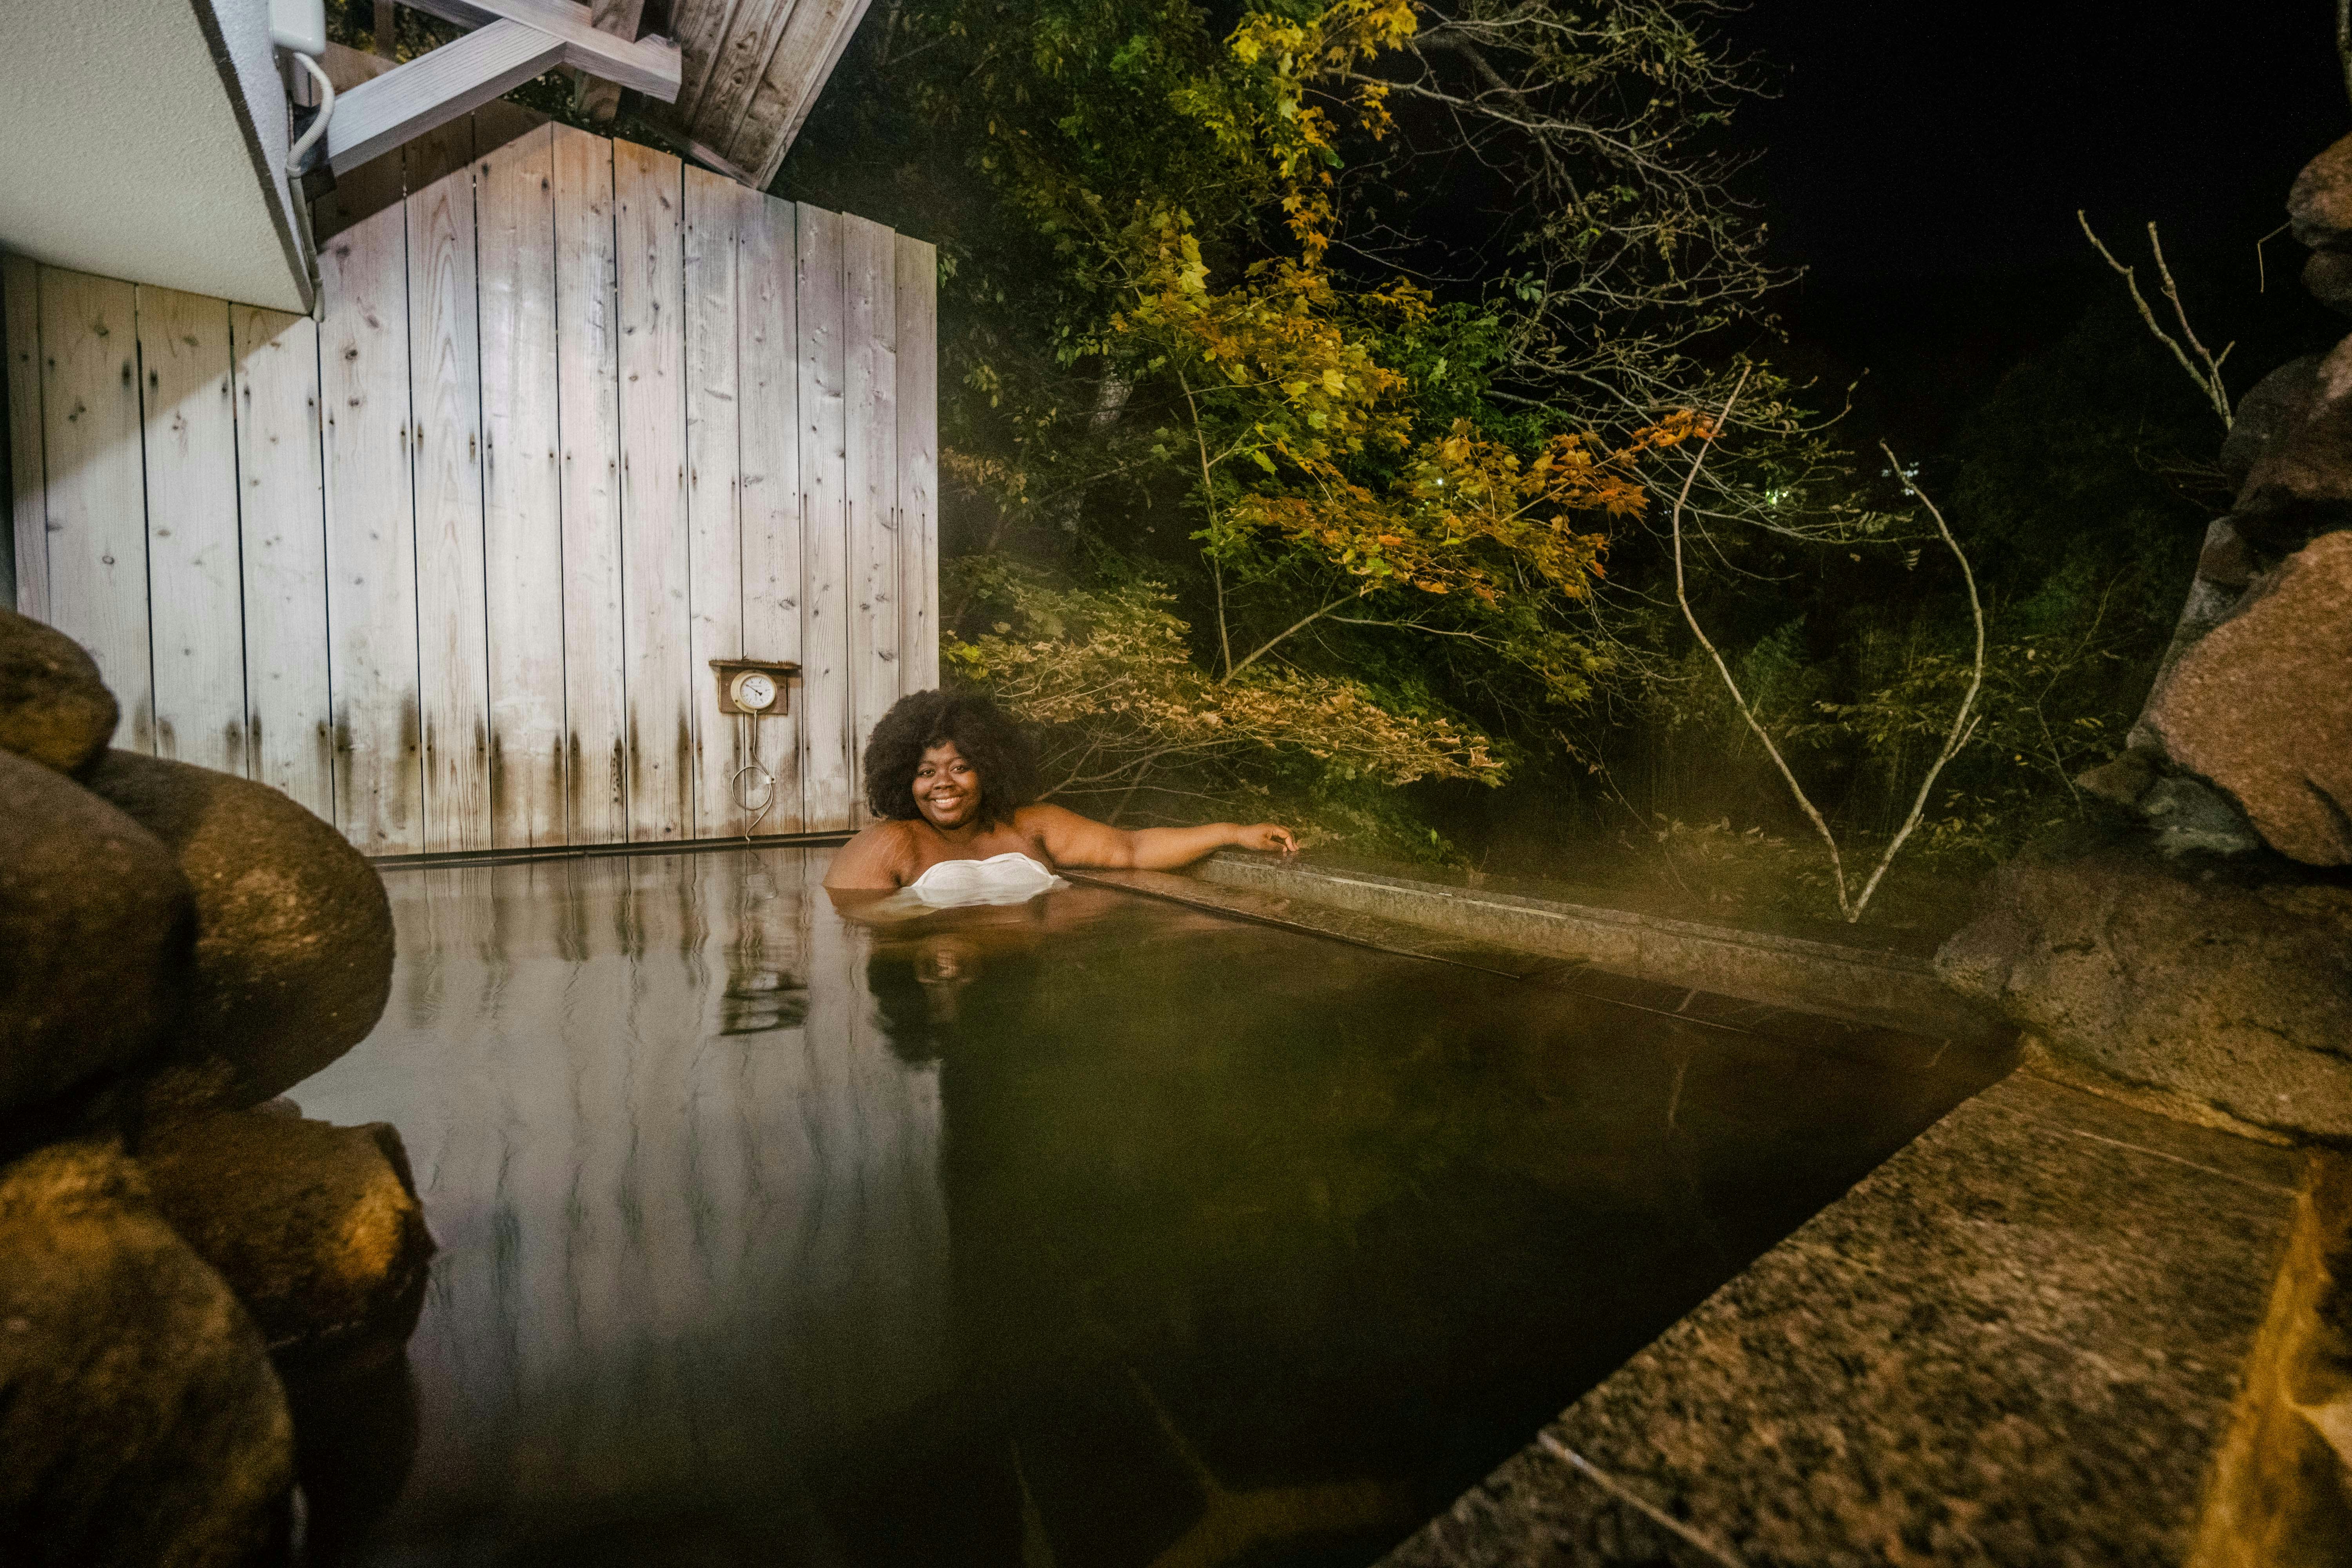 A woman relaxes in an onsen surrounded by nature